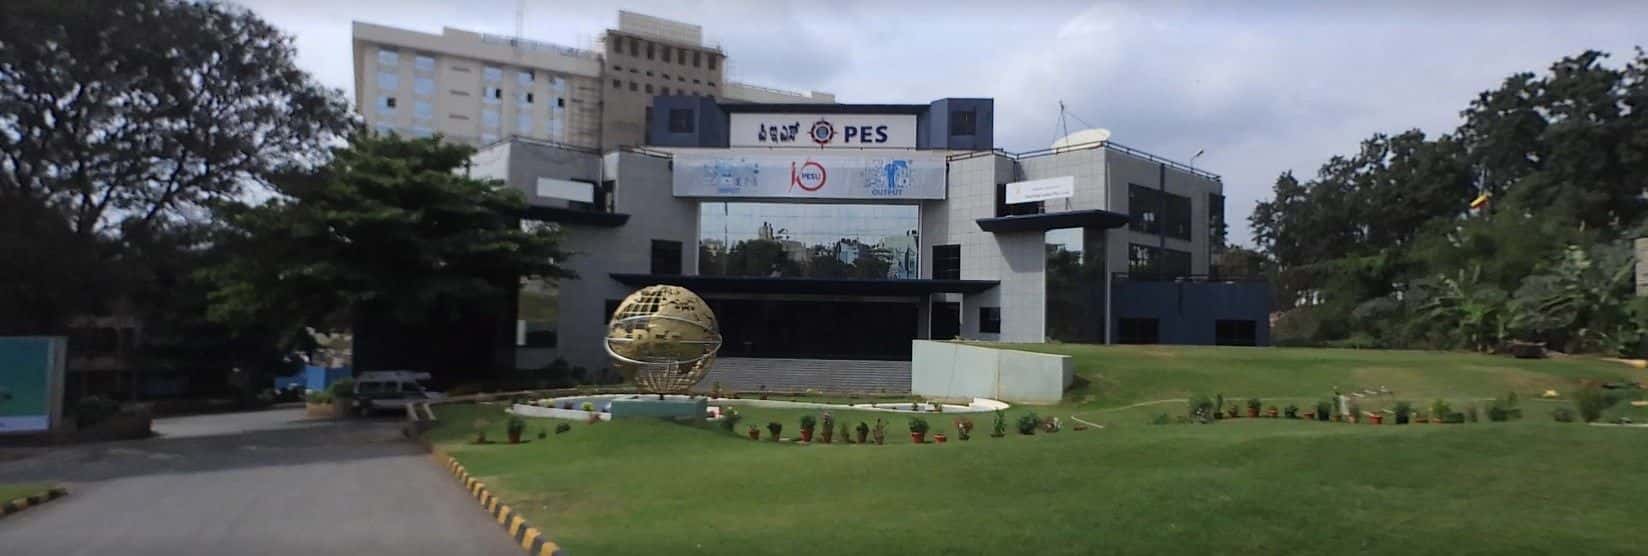 P.E.S. Institute Of Technology